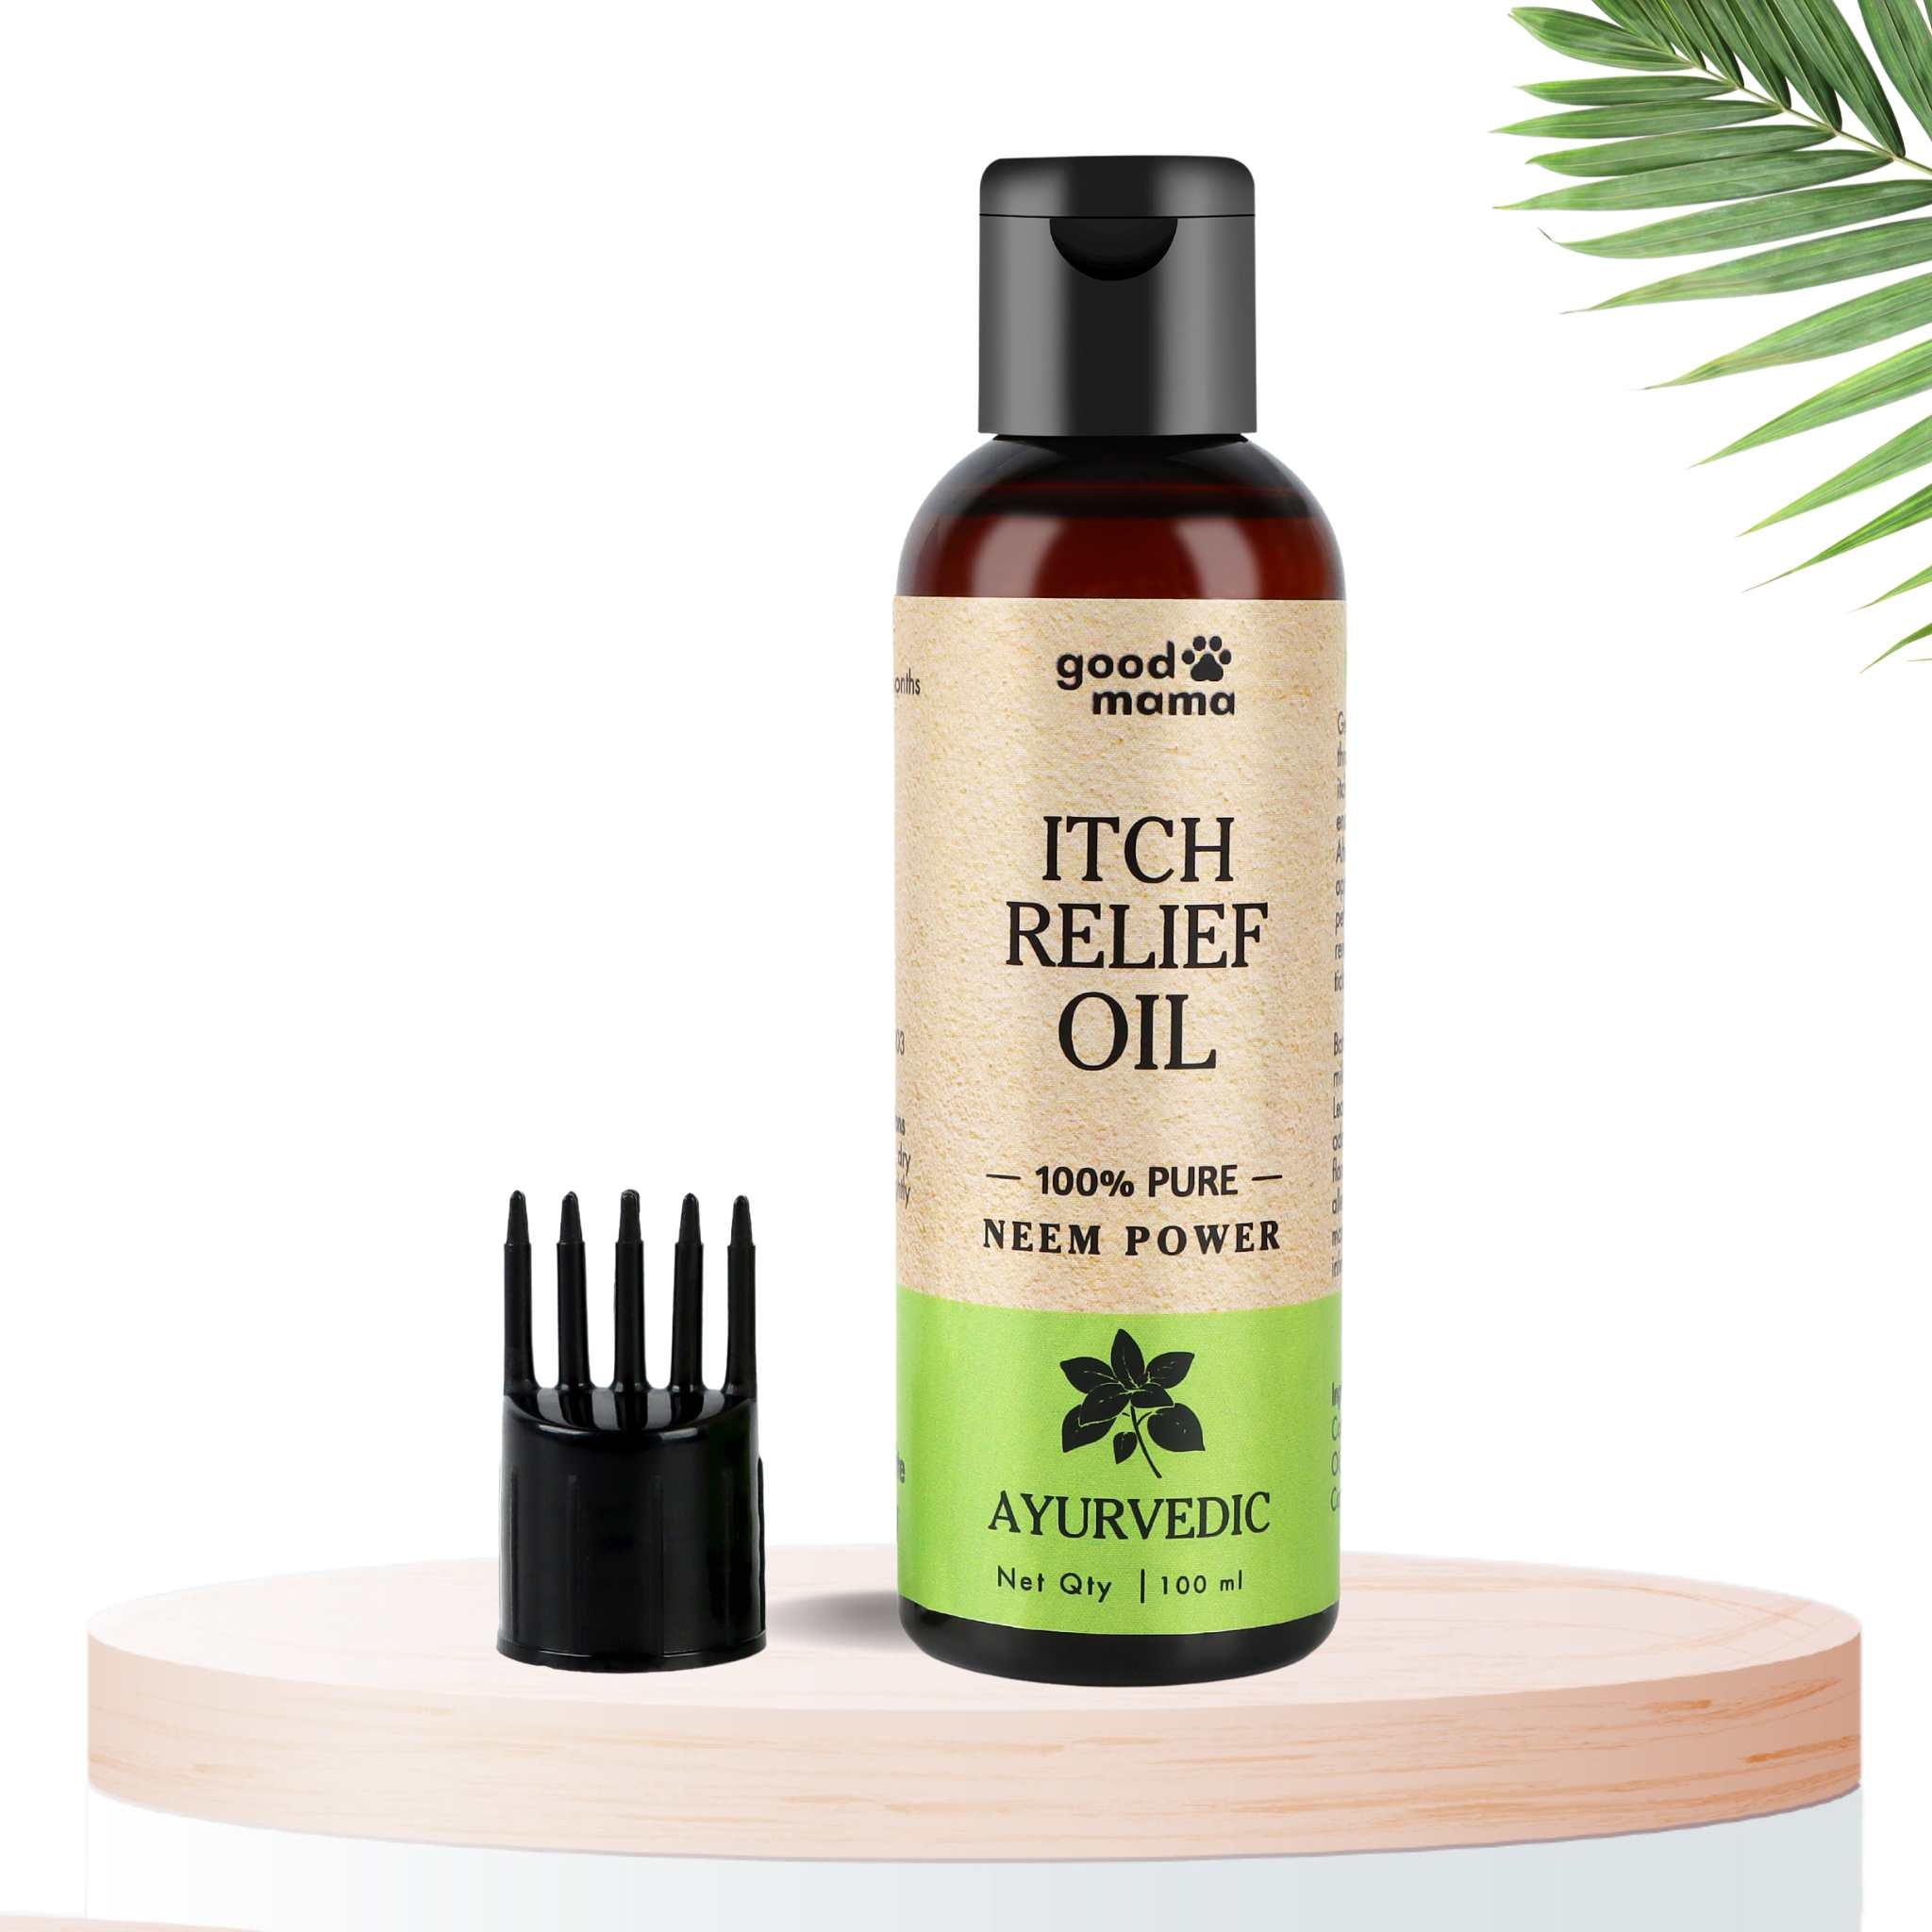 Itch Relief Oil